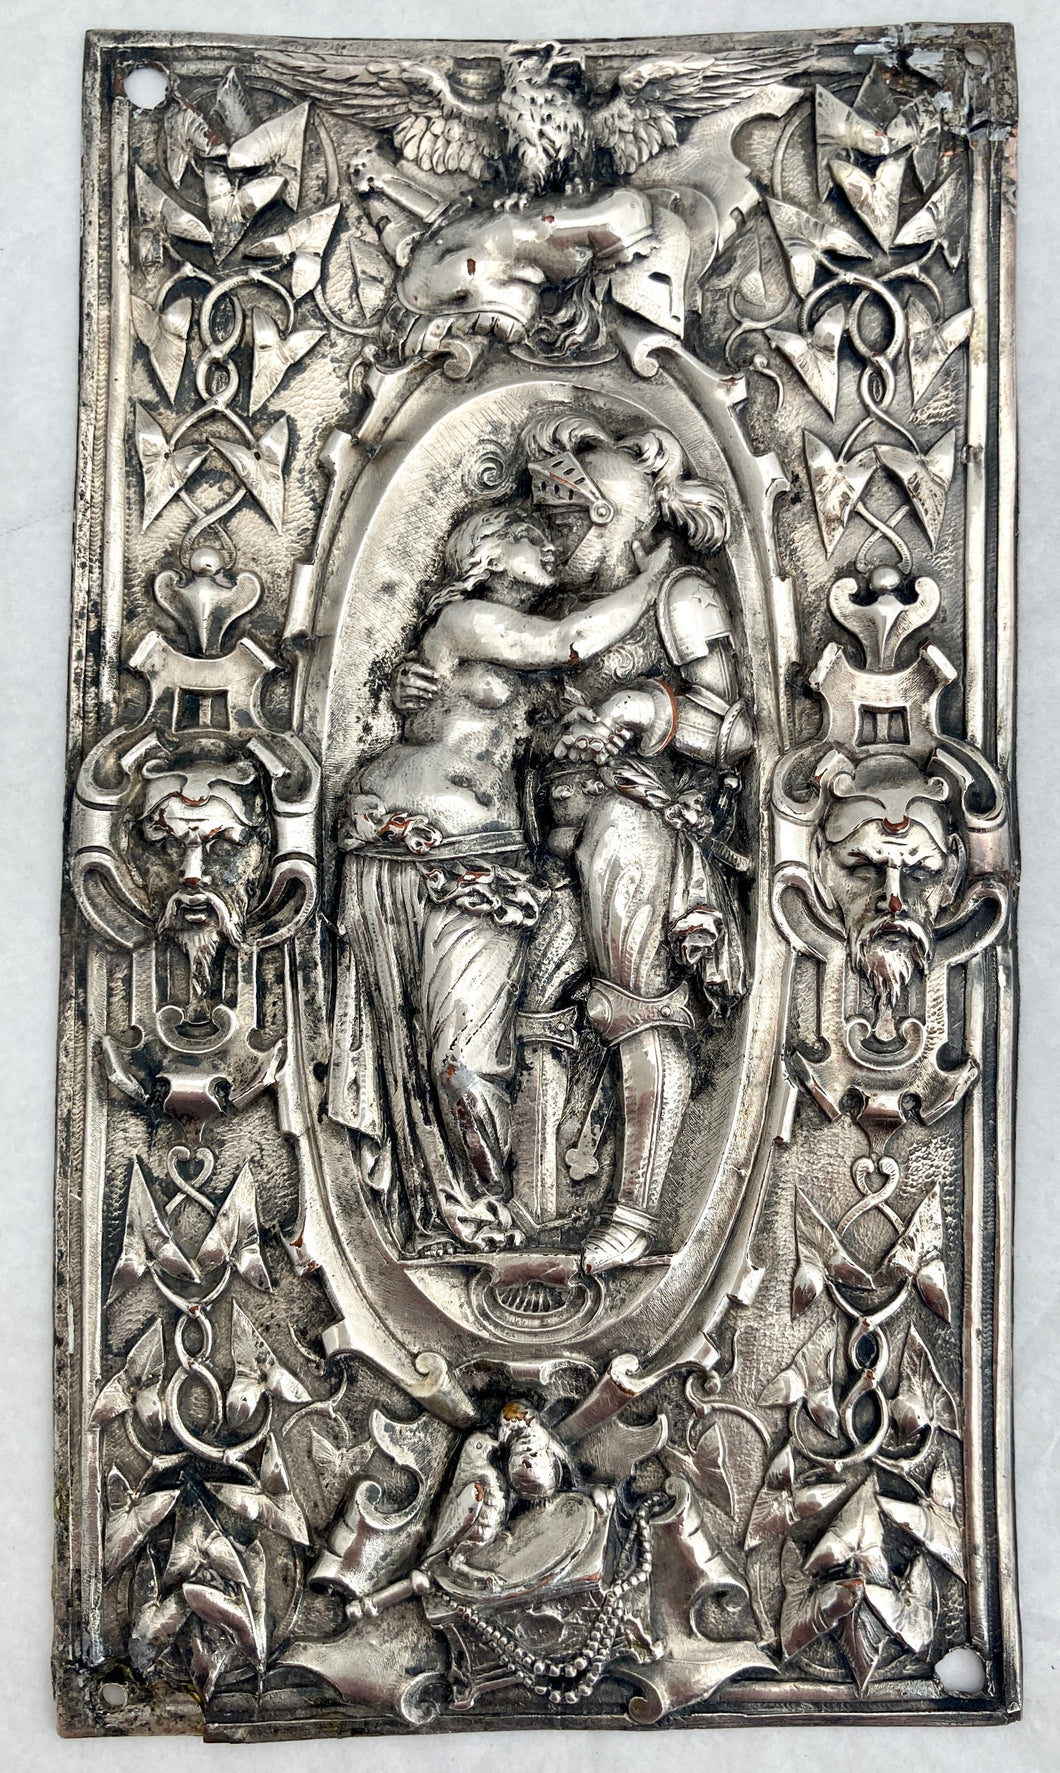 Victorian Art Movement Electrotype Silver Plated Relief Plaque, circa 1880 - 1900.